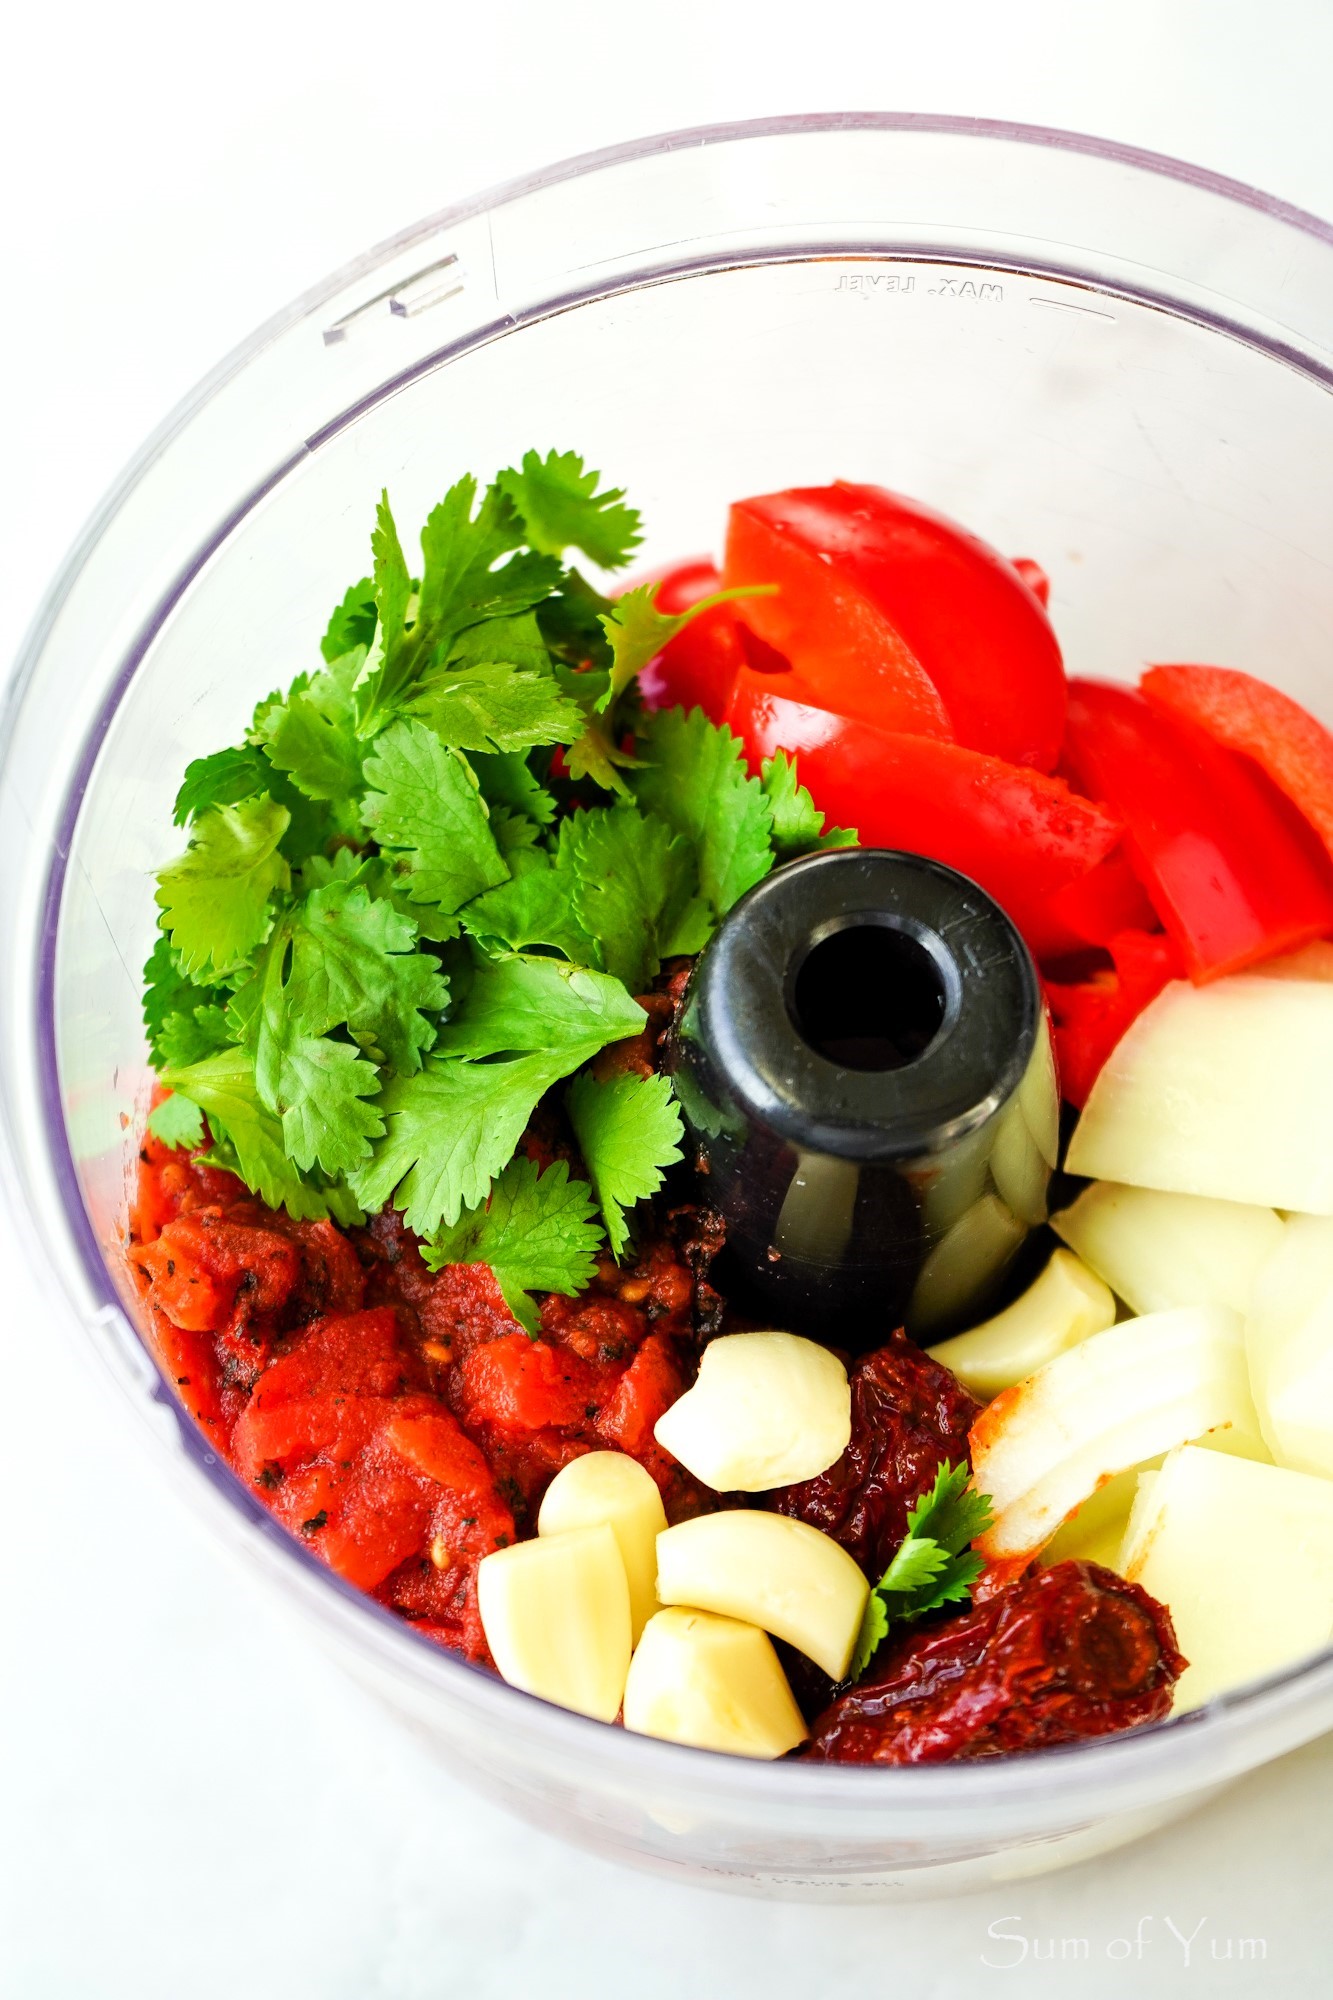 Chipotle Sofrito Ingredients